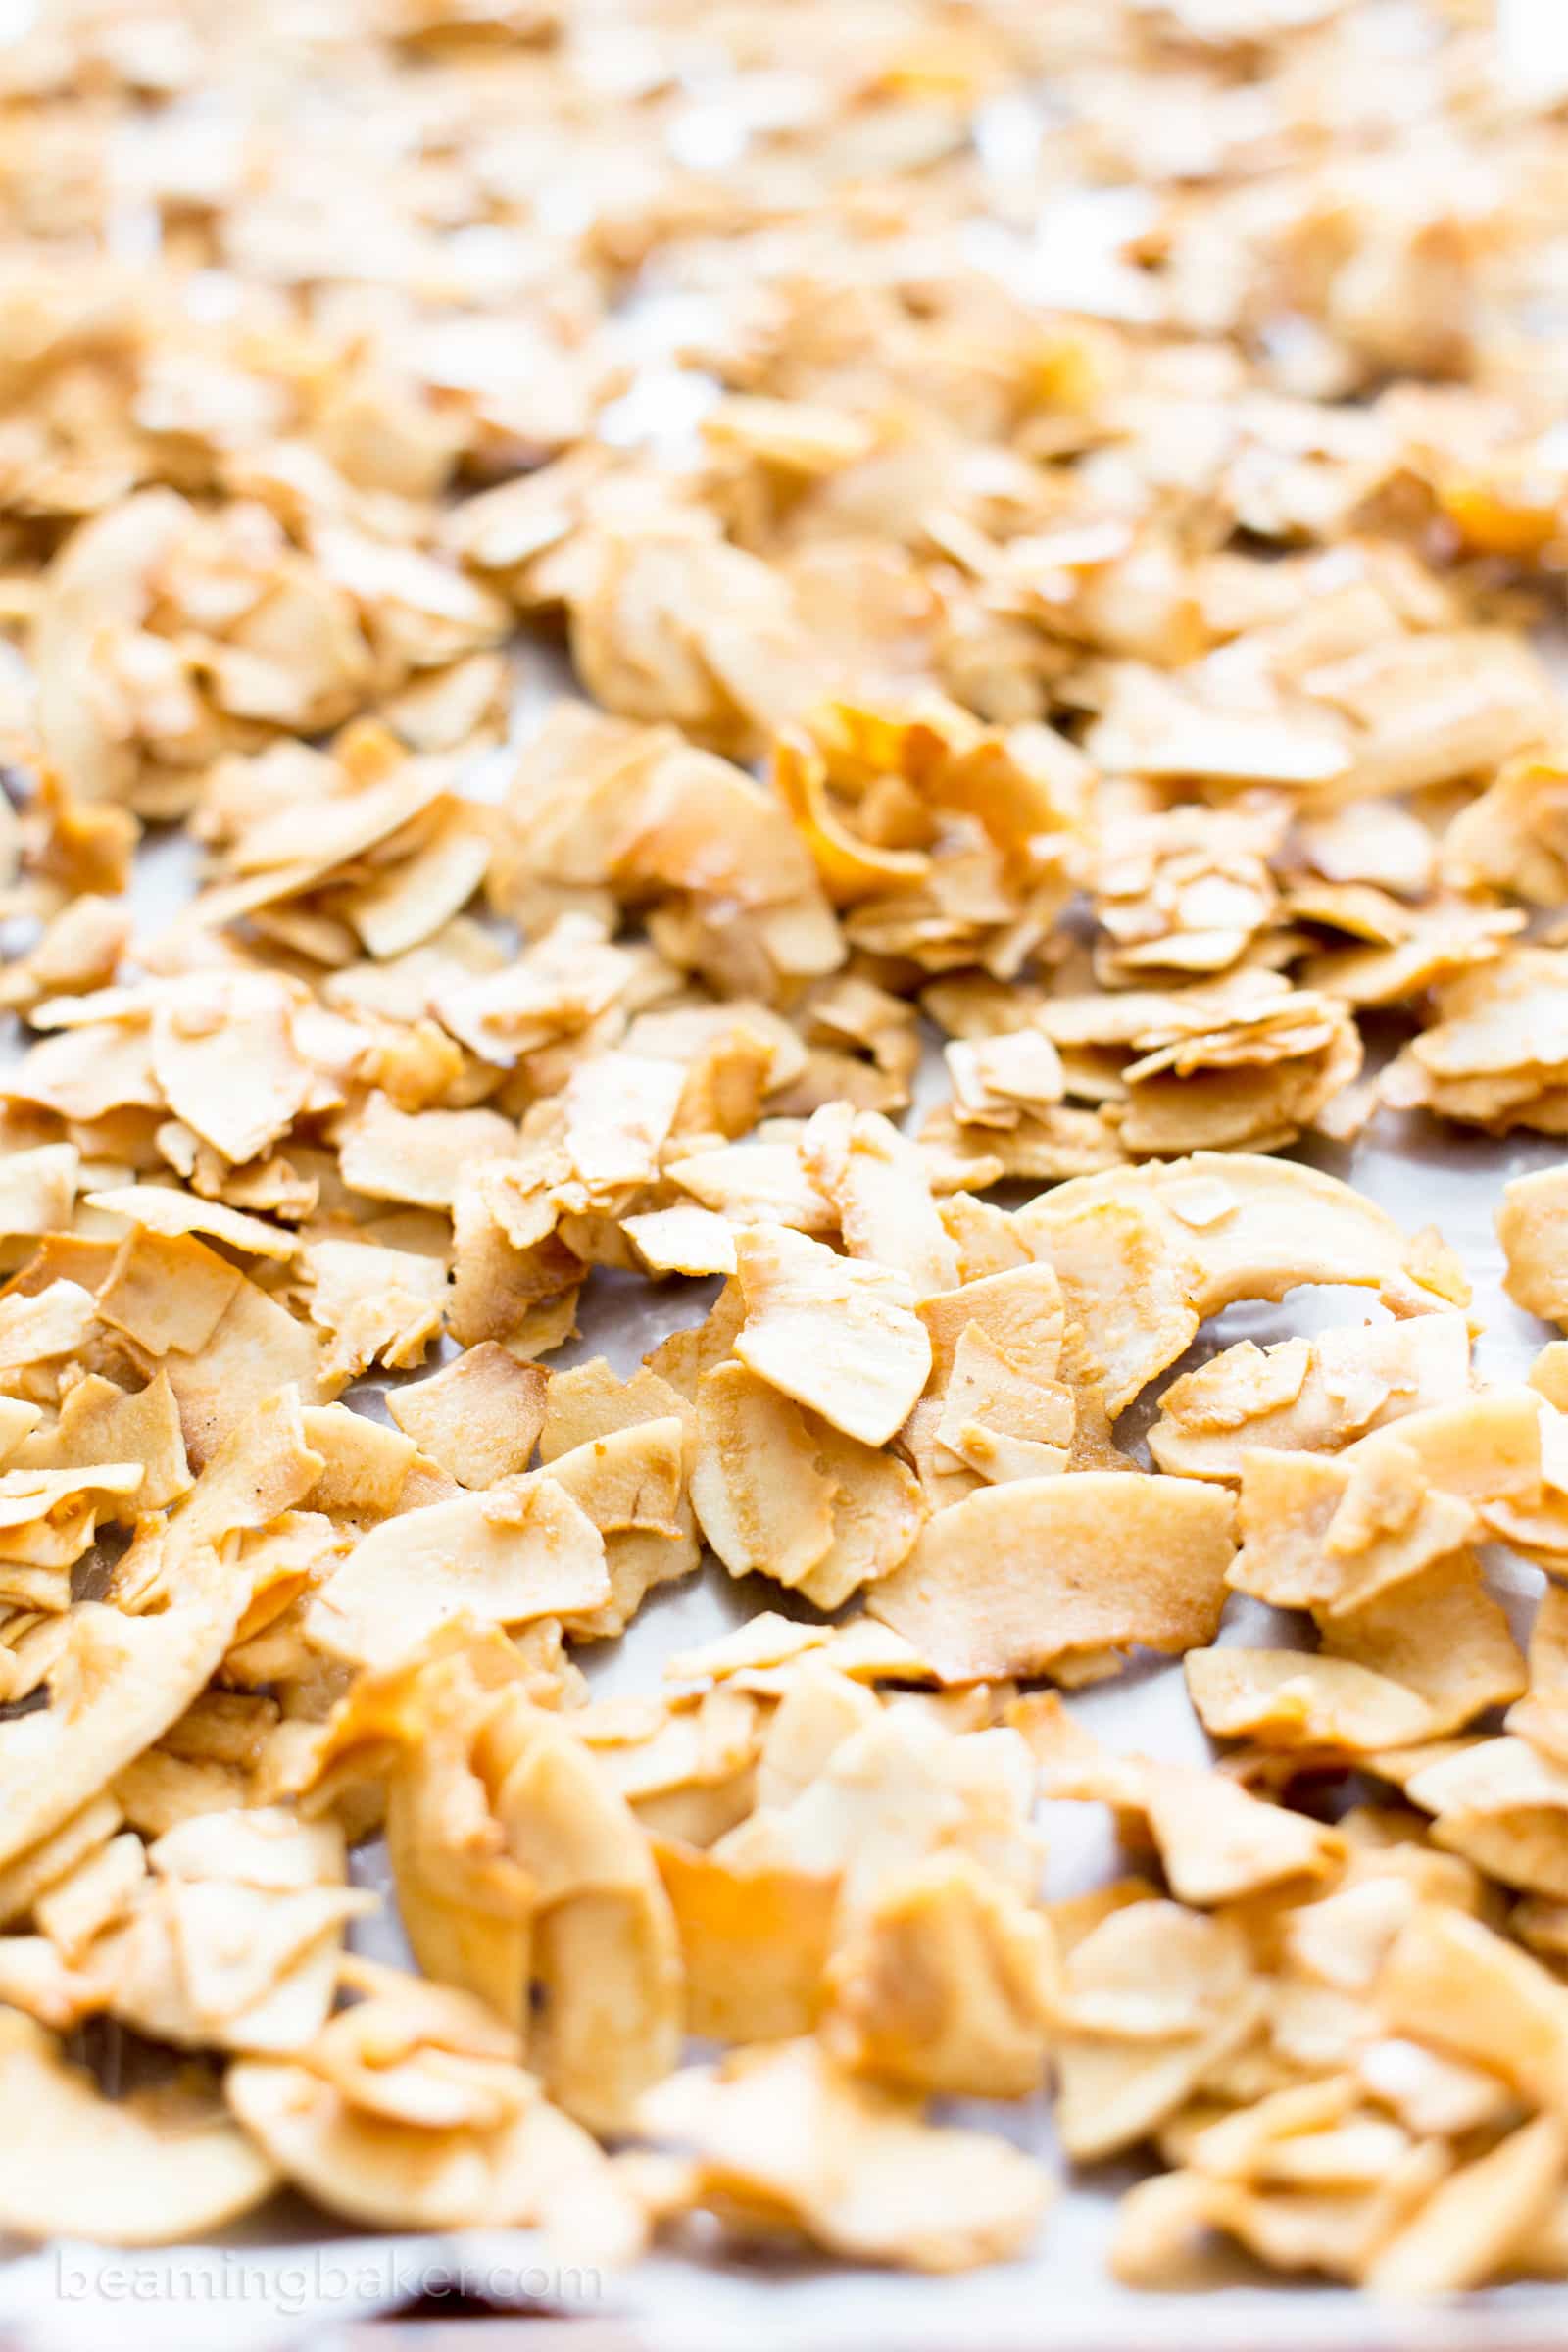 4 Ingredient Salted Caramel Toasted Coconut Chips (V, GF, Paleo): an easy, 5-minute prep recipe for crispy, salty ‘n sweet coconut chips caramelized to perfection. #Paleo #Vegan #GlutenFree #RefinedSugarFree #DairyFree | BeamingBaker.com